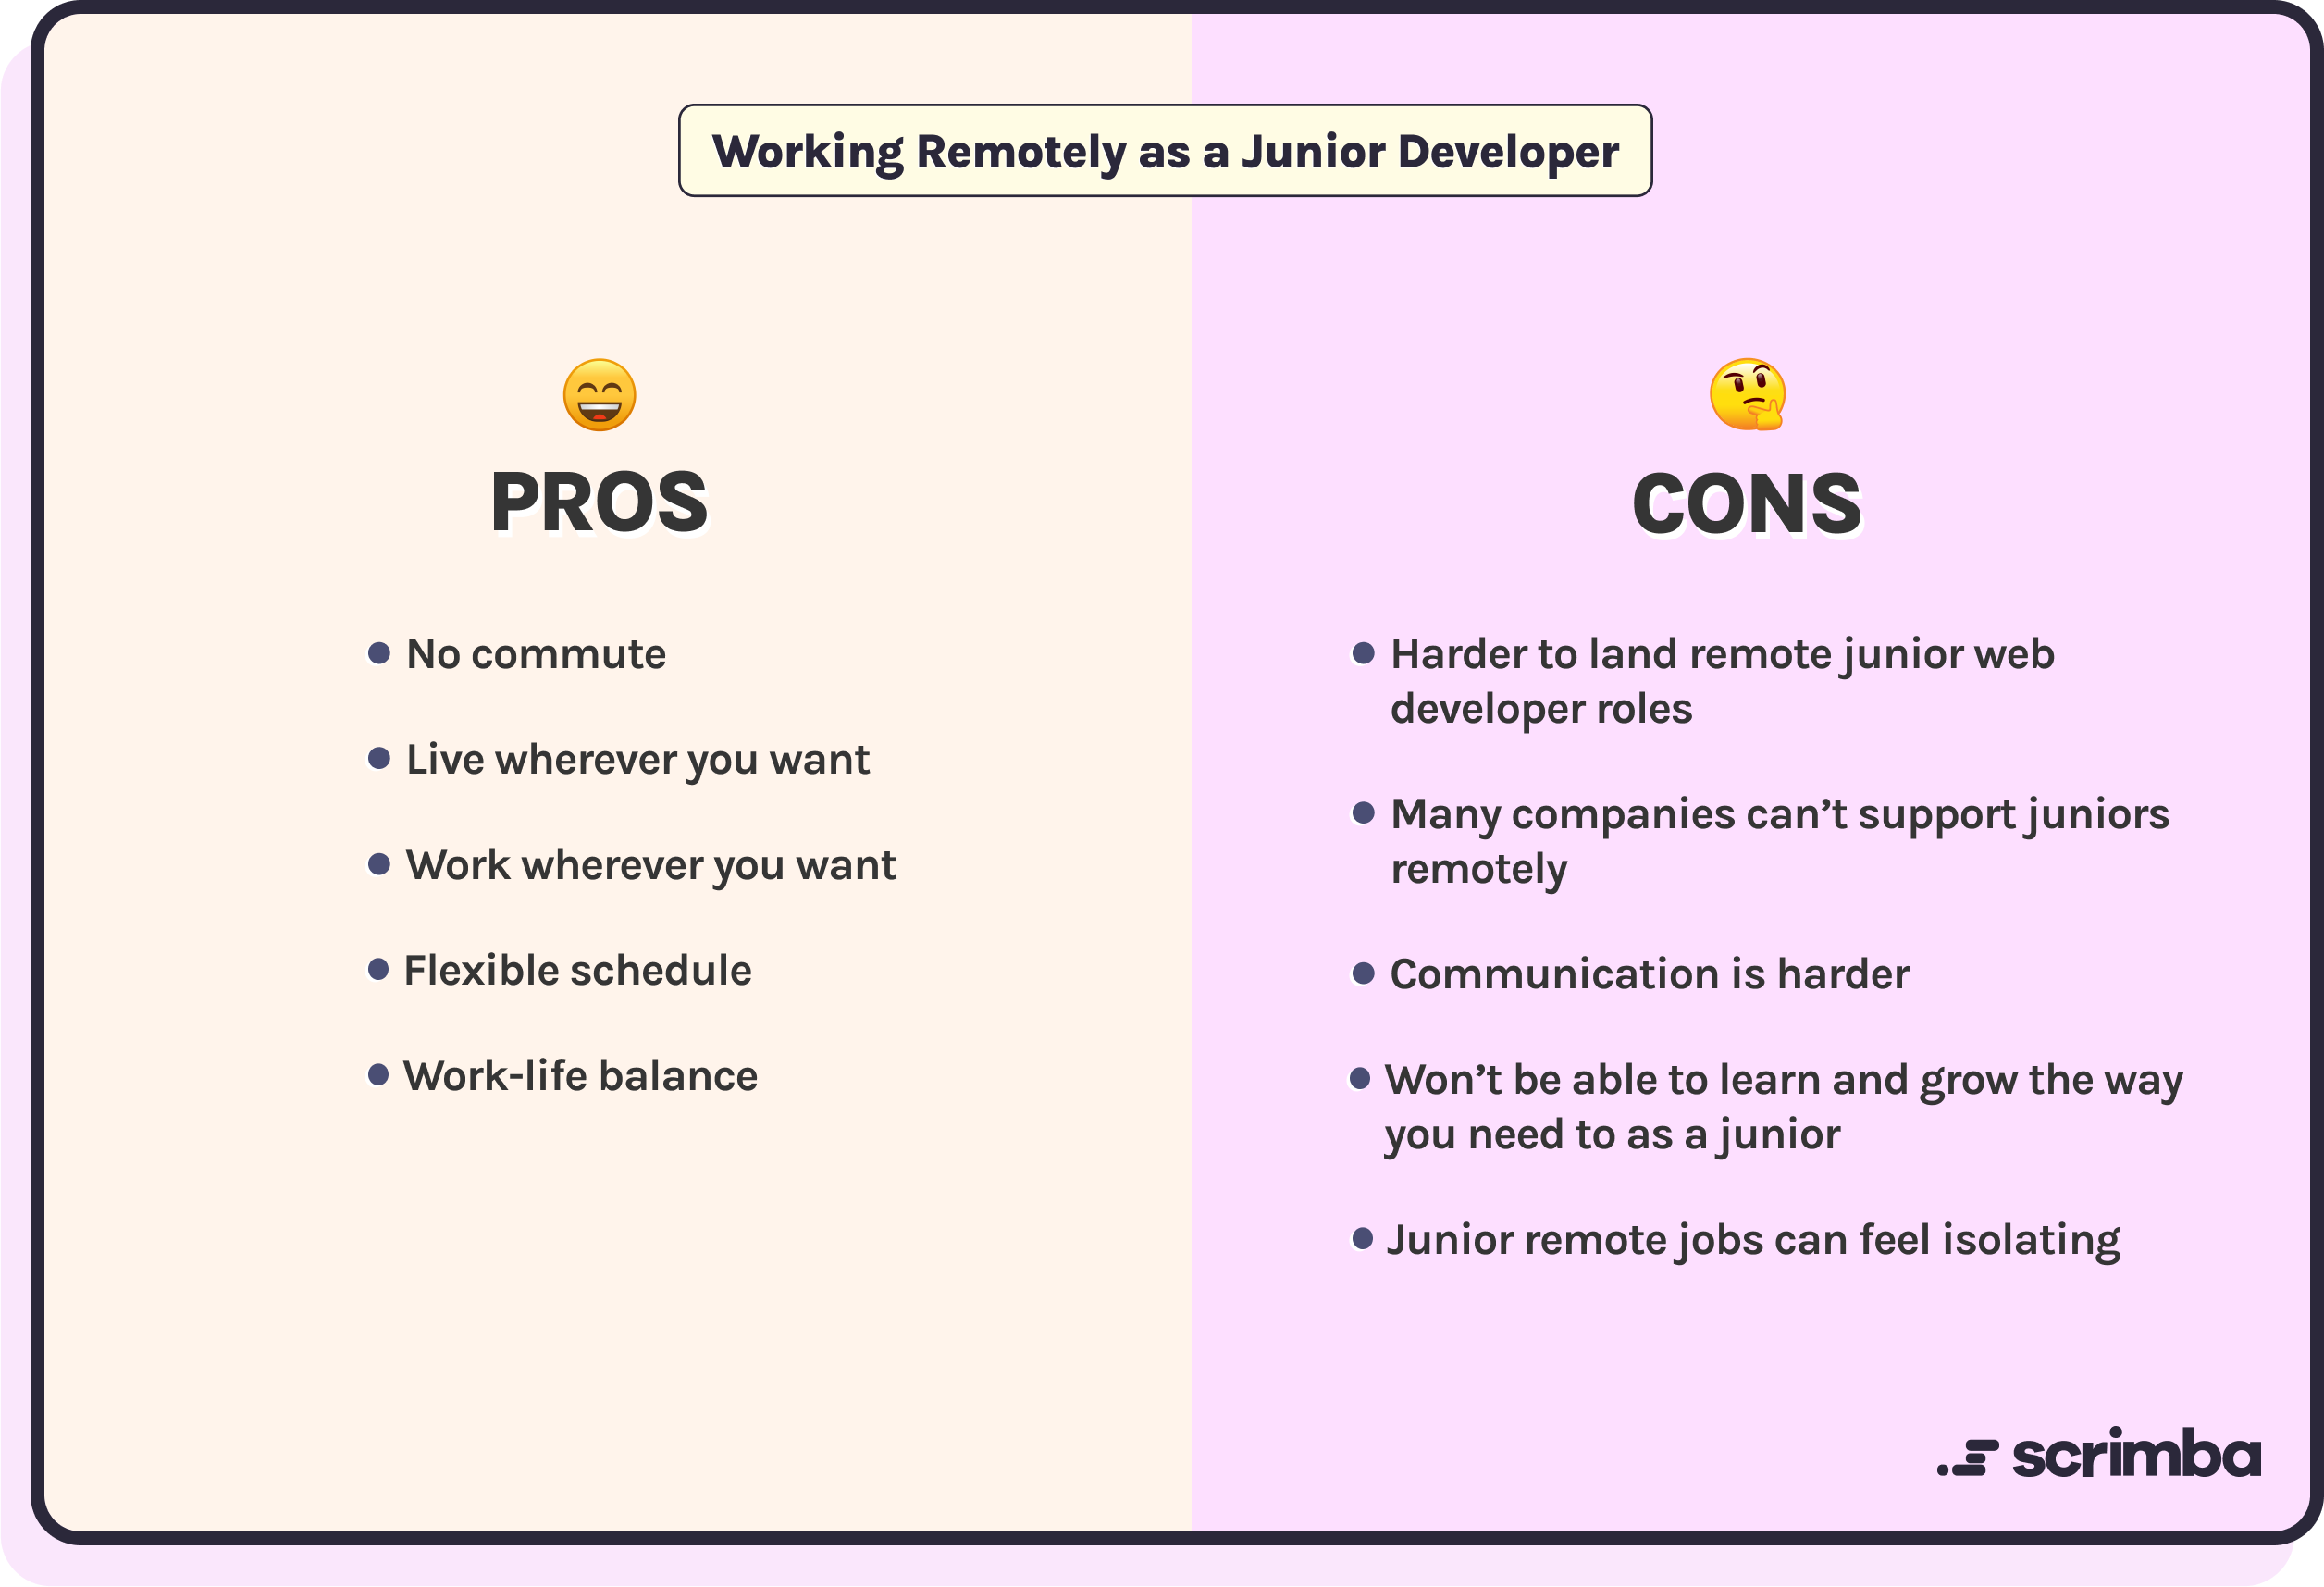 Pros and Cons of working remotely as a junior developer